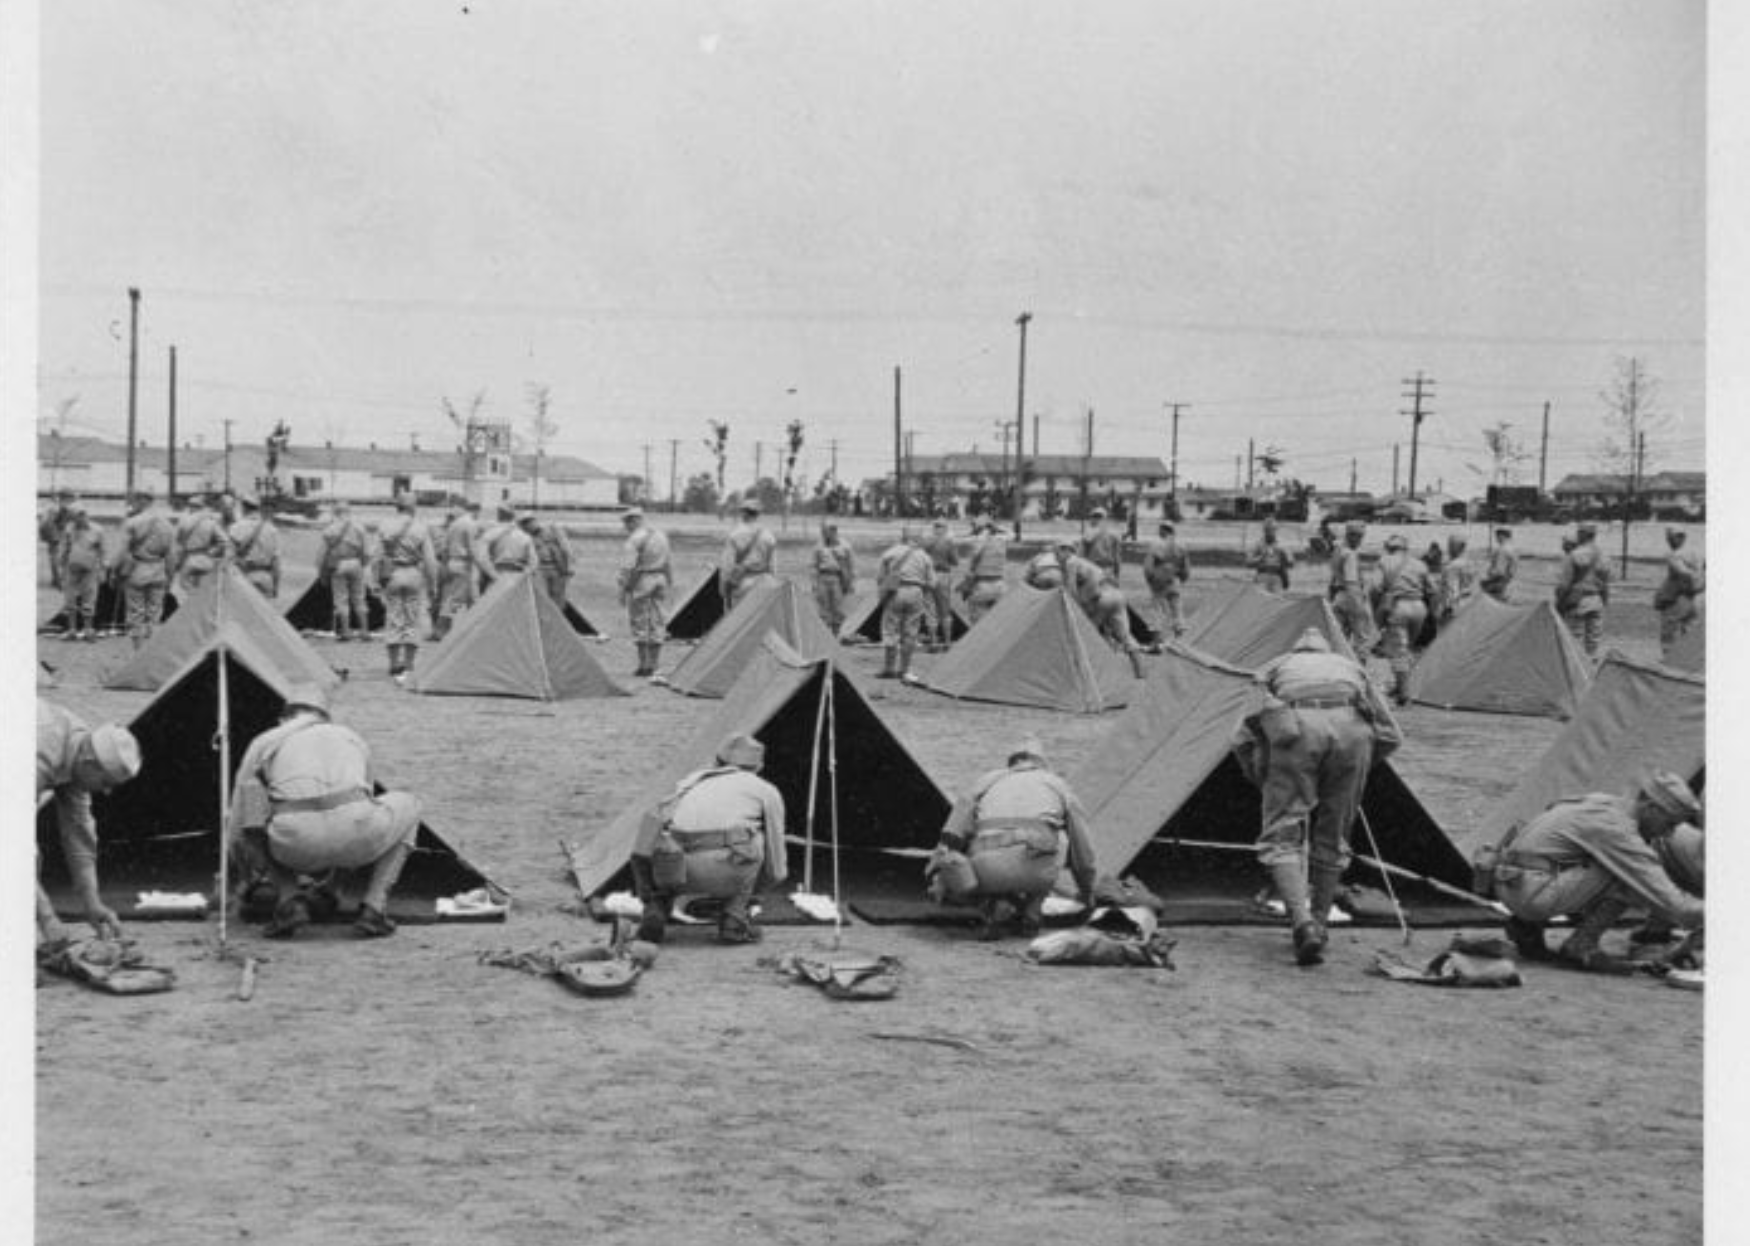 Rows and rows of tents line Fort Custer in Michigan to house the 12th General Hospital crew members.